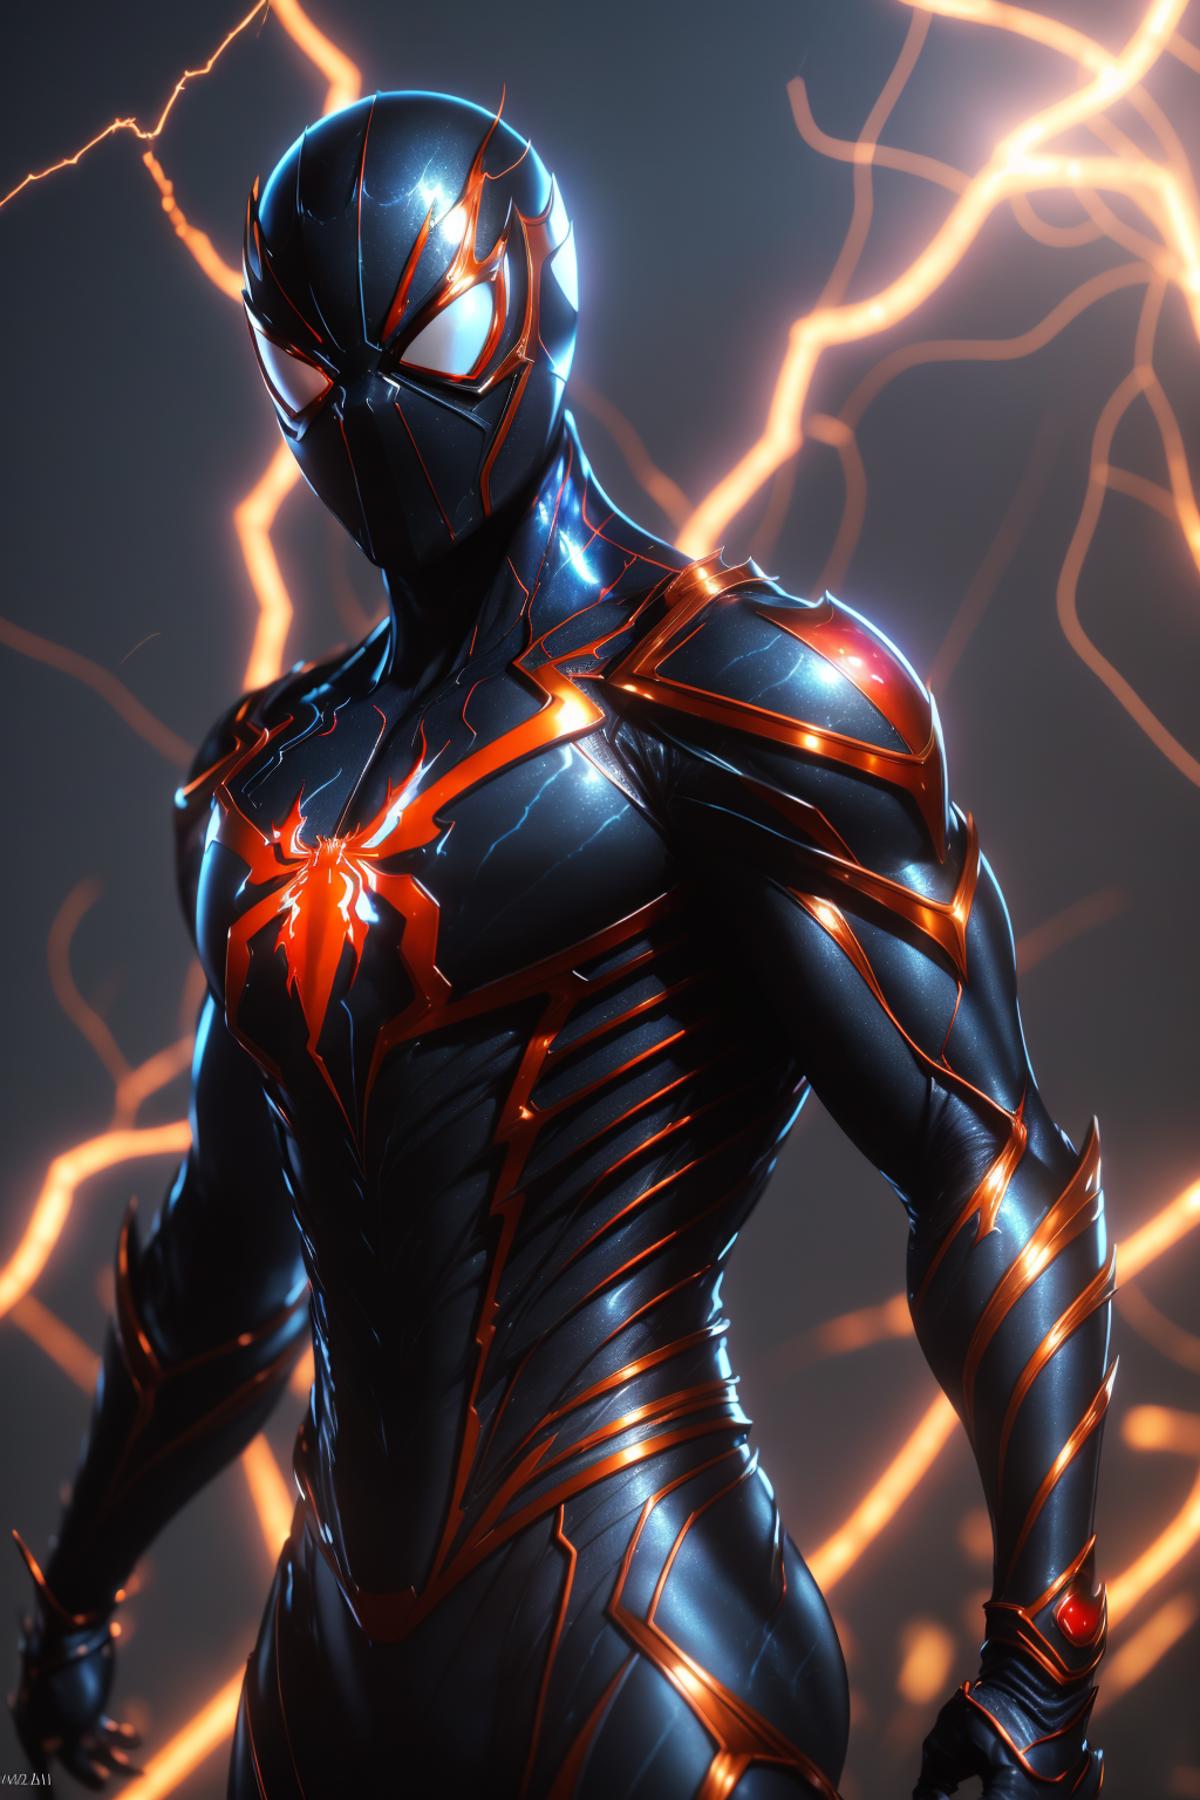 Armored Spiderverse image by DeViLDoNia